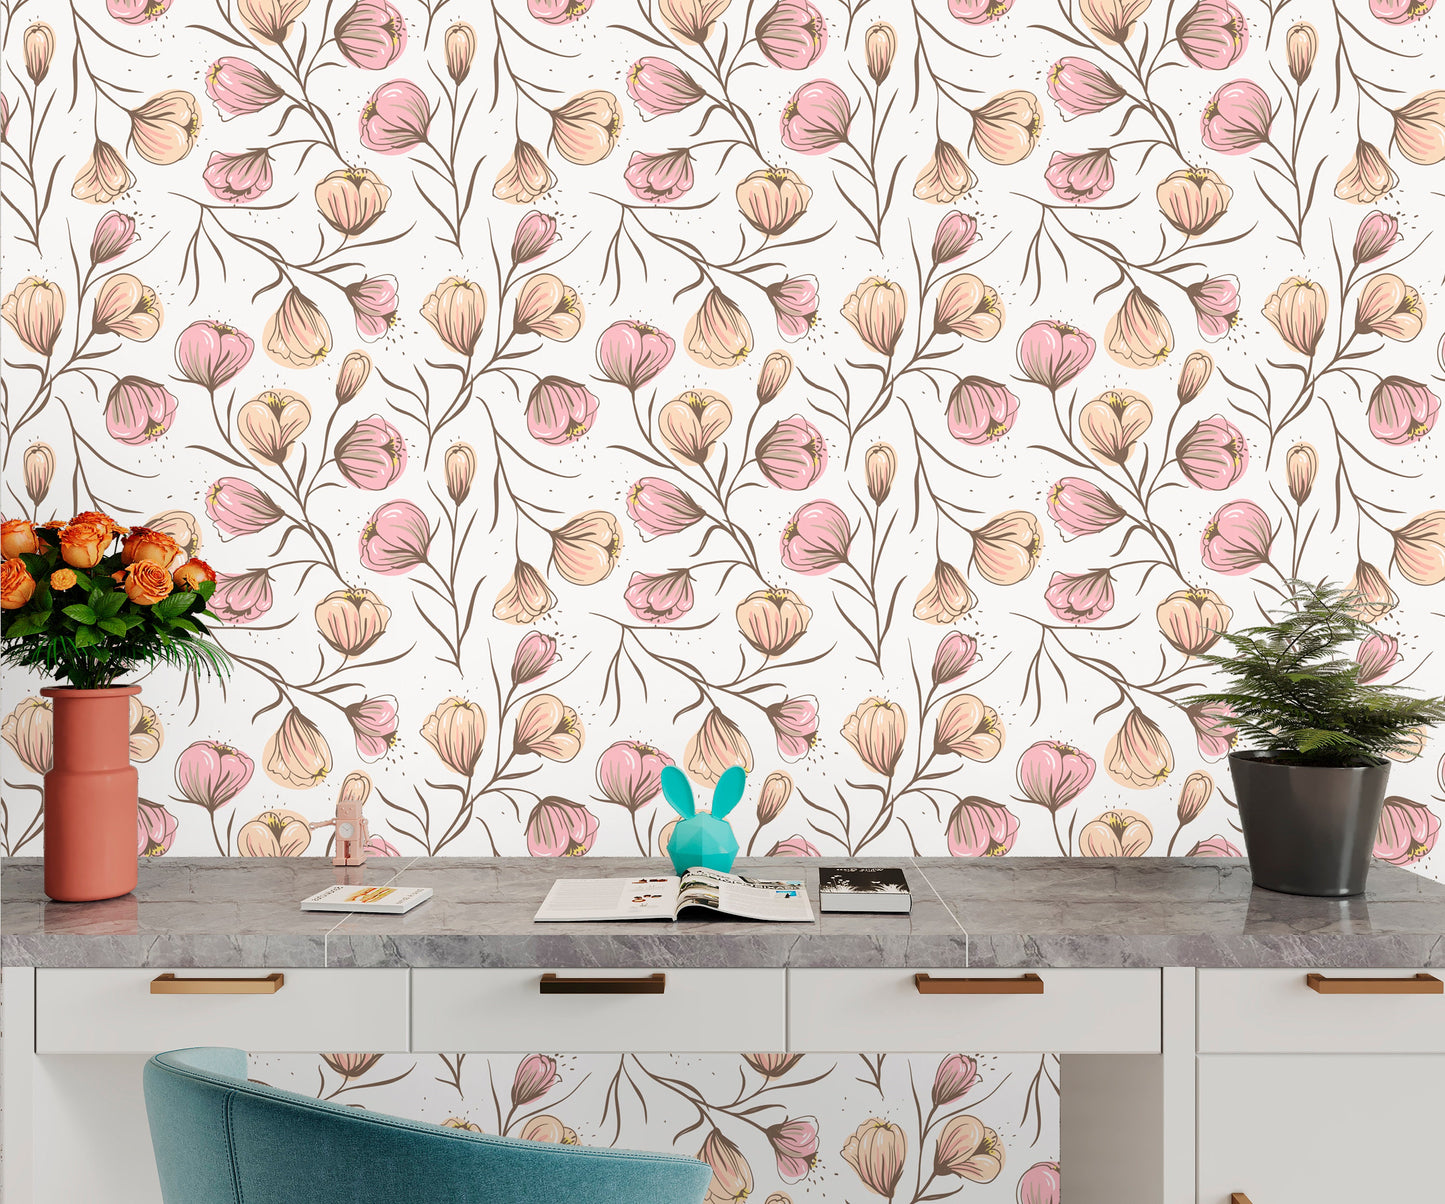 Pink Floral Wallpaper Peel and Stick, Spring Wallpaper, Farmhouse Wallpaper, Nursery Wallpaper, Removable Wall Paper